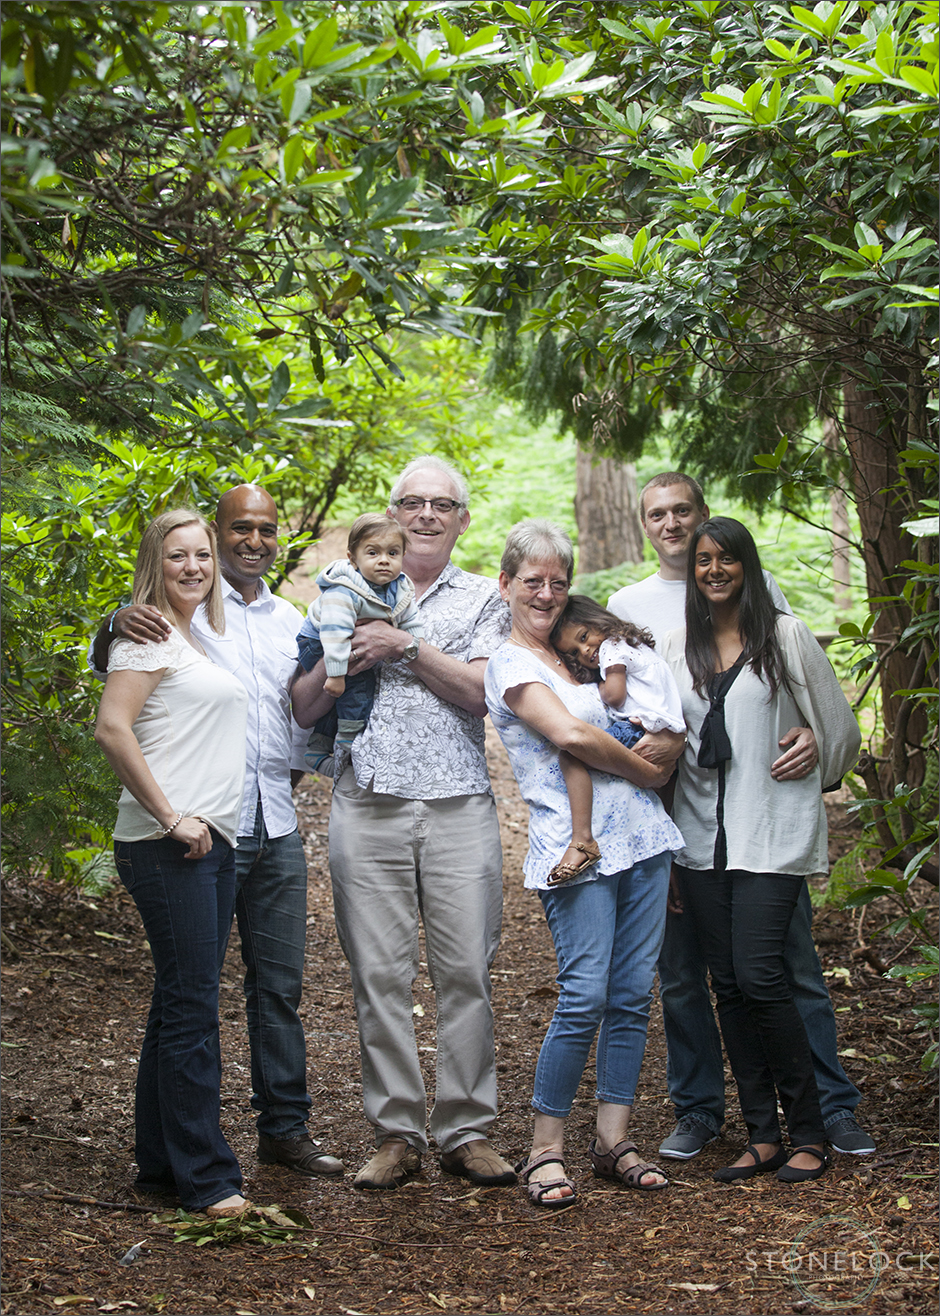 A family photo shoot in Coombe Wood, Croydon with grandparents, adult children and grandchildren. The family stand in the wood, amongst the trees